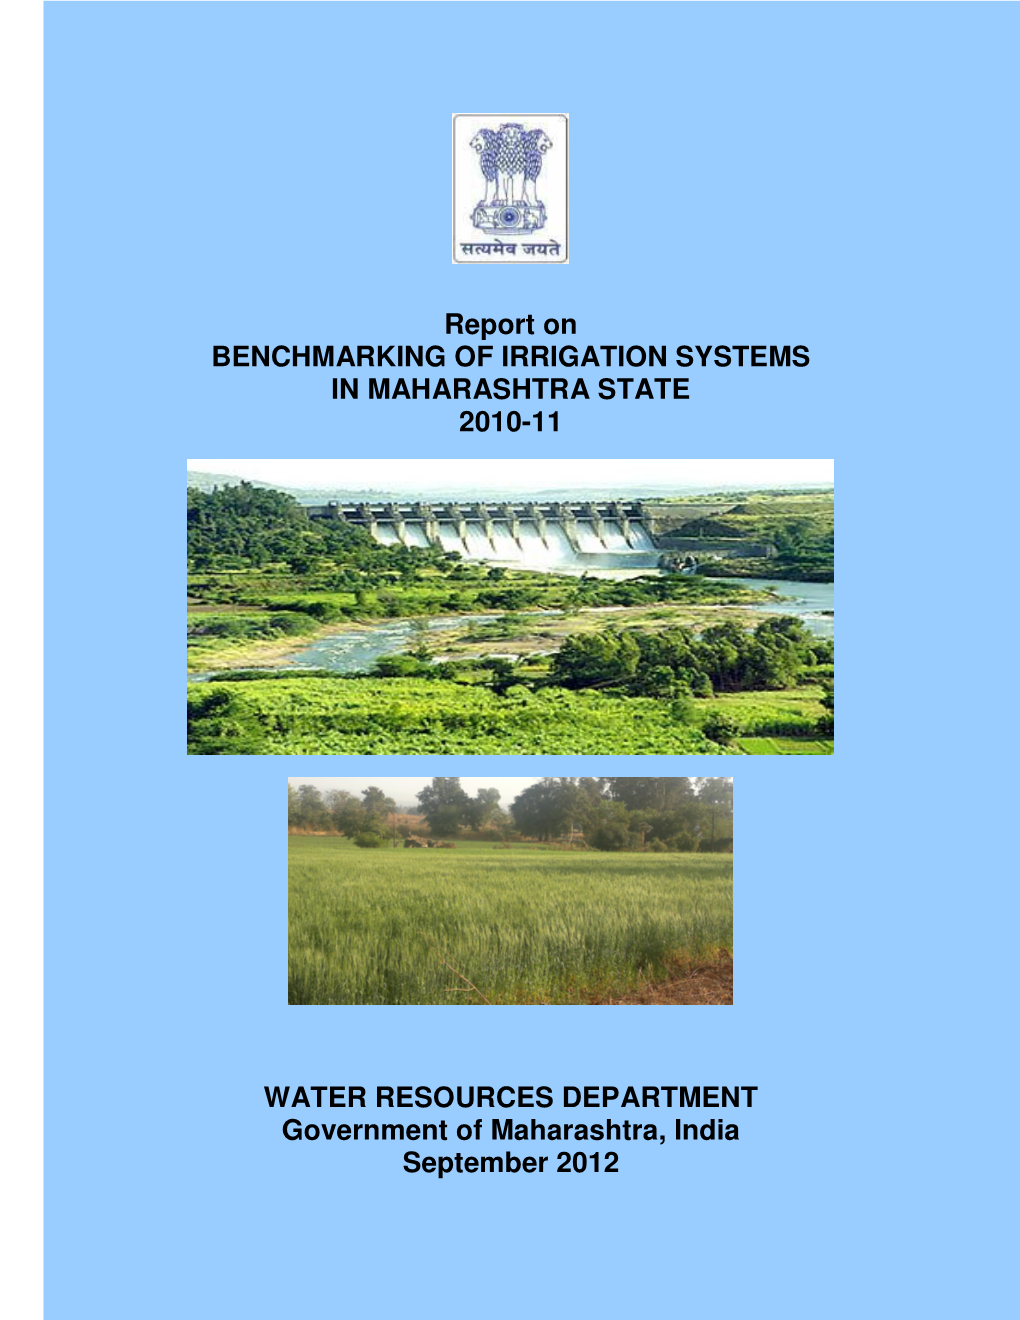 Report on BENCHMARKING of IRRIGATION SYSTEMS in MAHARASHTRA STATE 2010-11 WATER RESOURCES DEPARTMENT Government of Maharashtra